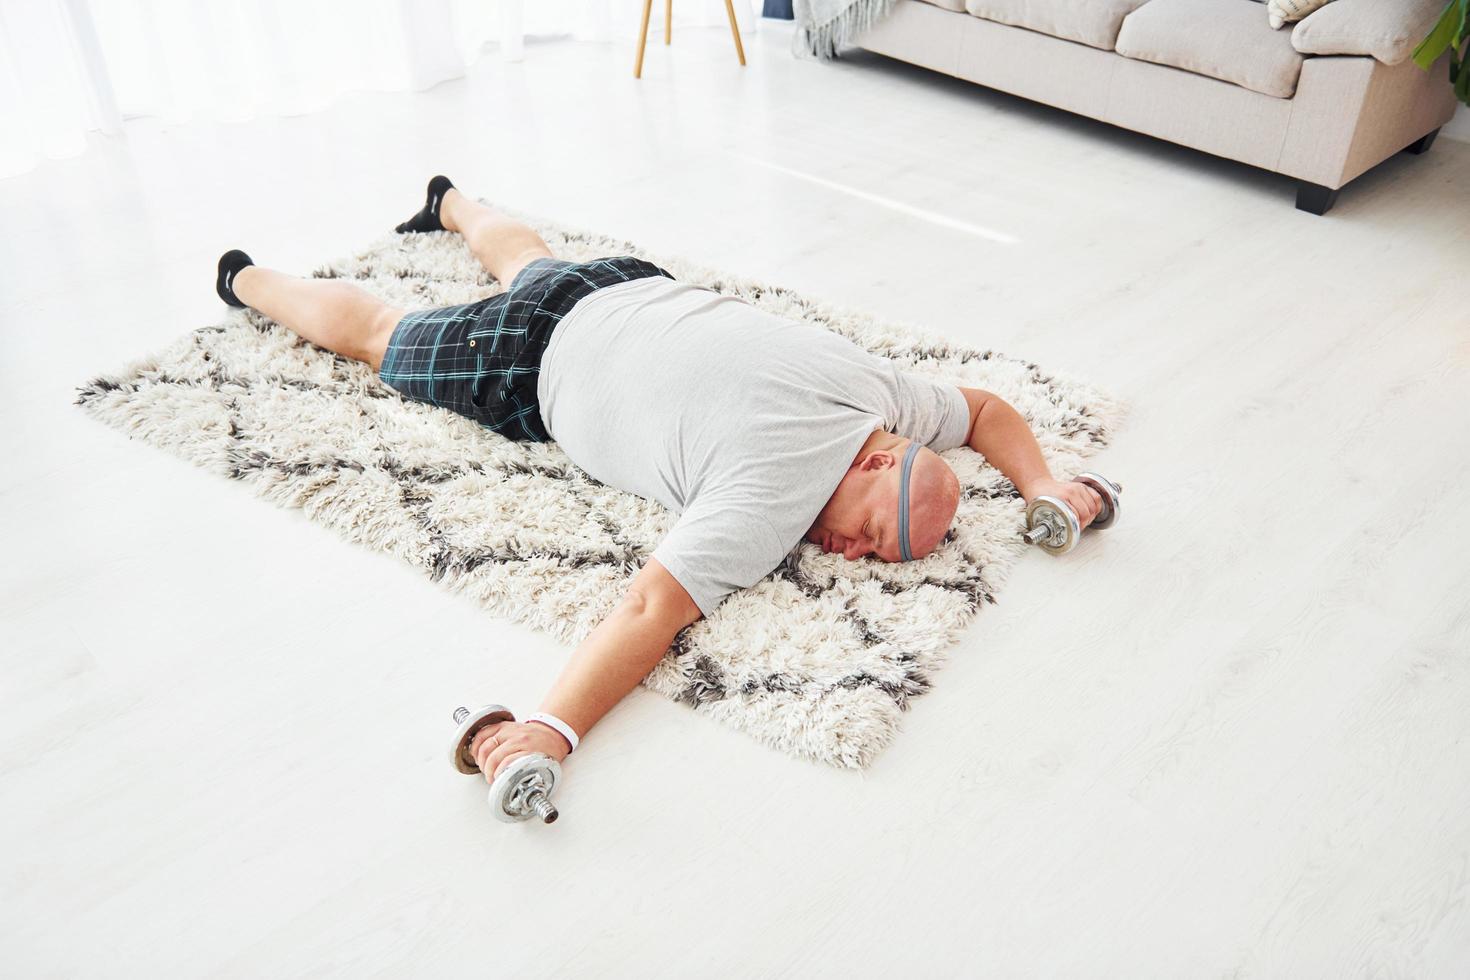 Laying down exhausted. With dumbbells in hands. Funny overweight man in casual clothes is indoors at home photo